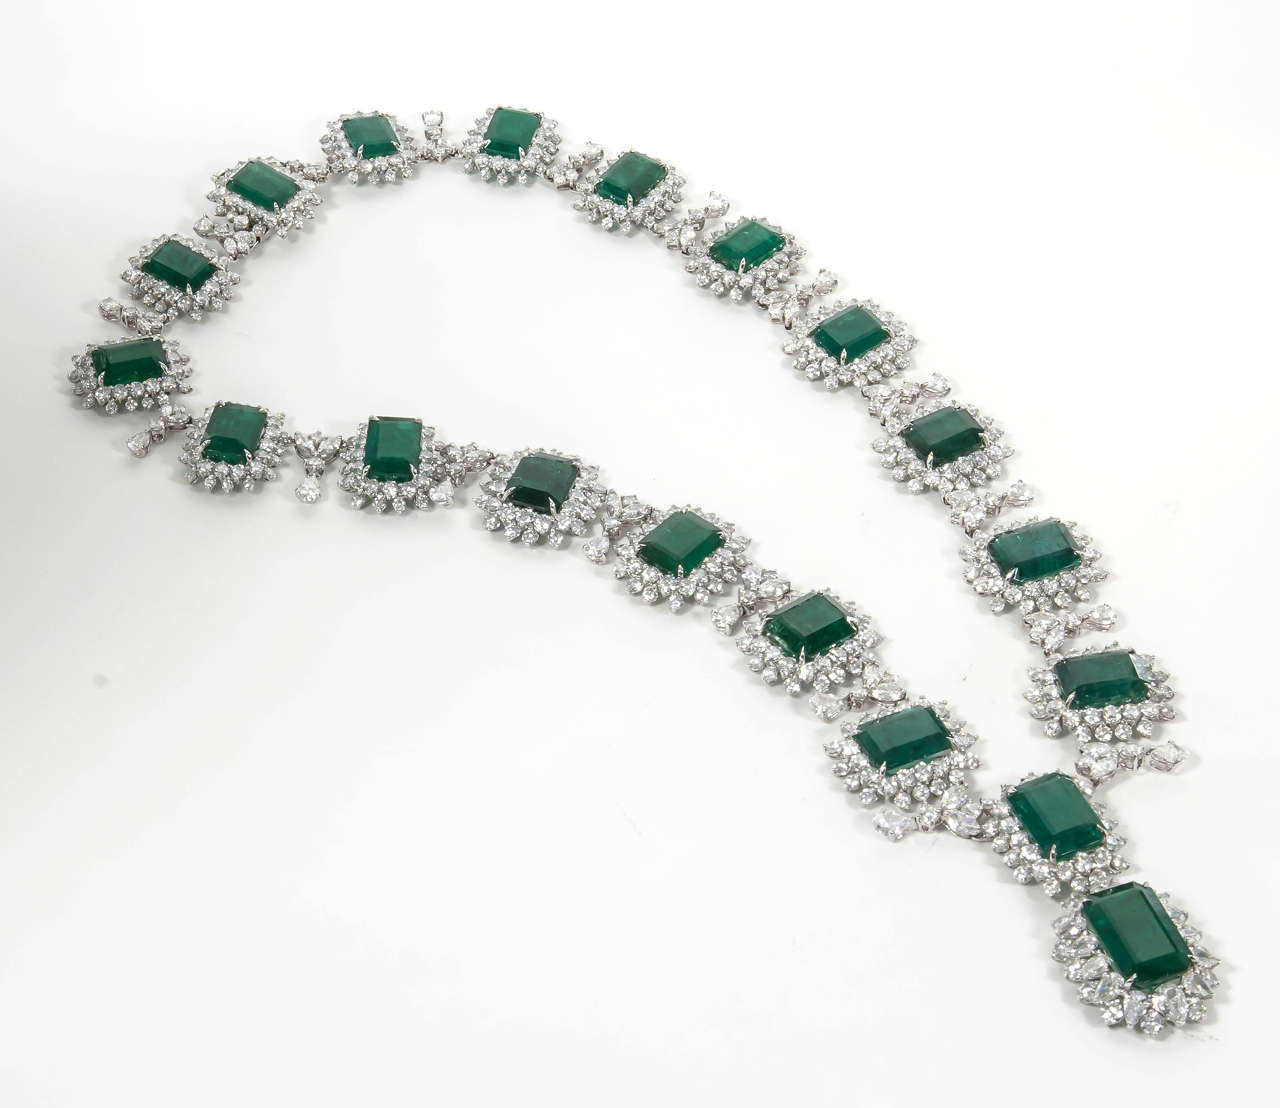 A magnificent piece.

141 carats of fine green emeralds.

63.16 carats of diamonds. 

Handmade, set in platinum. 

Please contact us for more information.